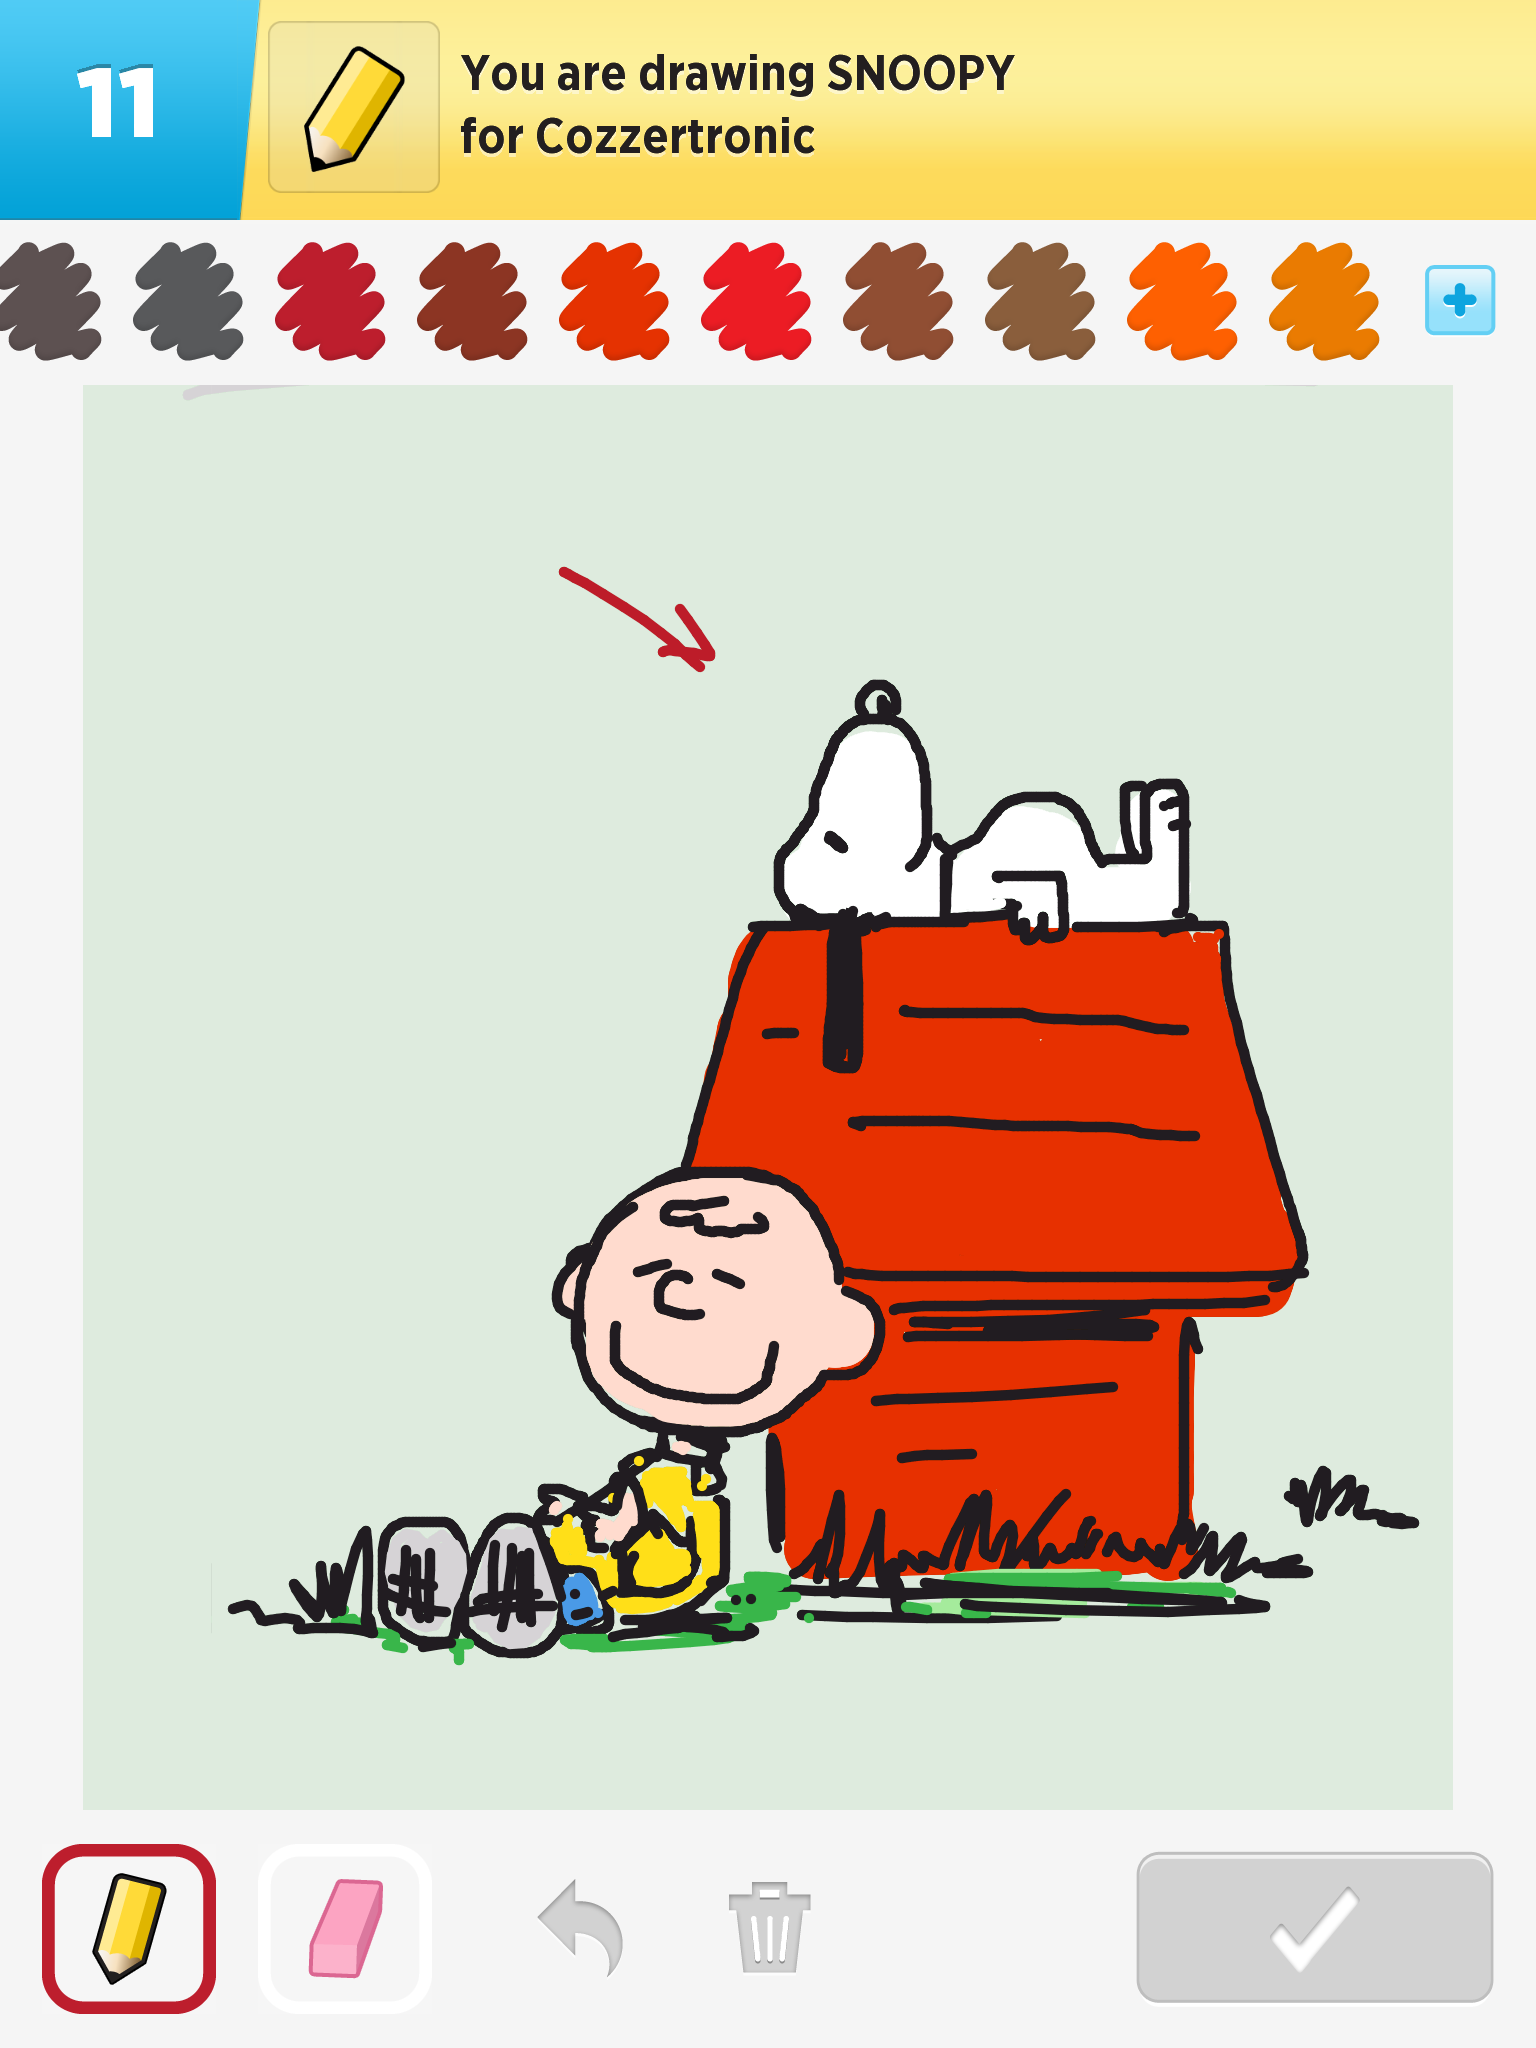 Snoopy - Draw Something Fin - HD Wallpaper 